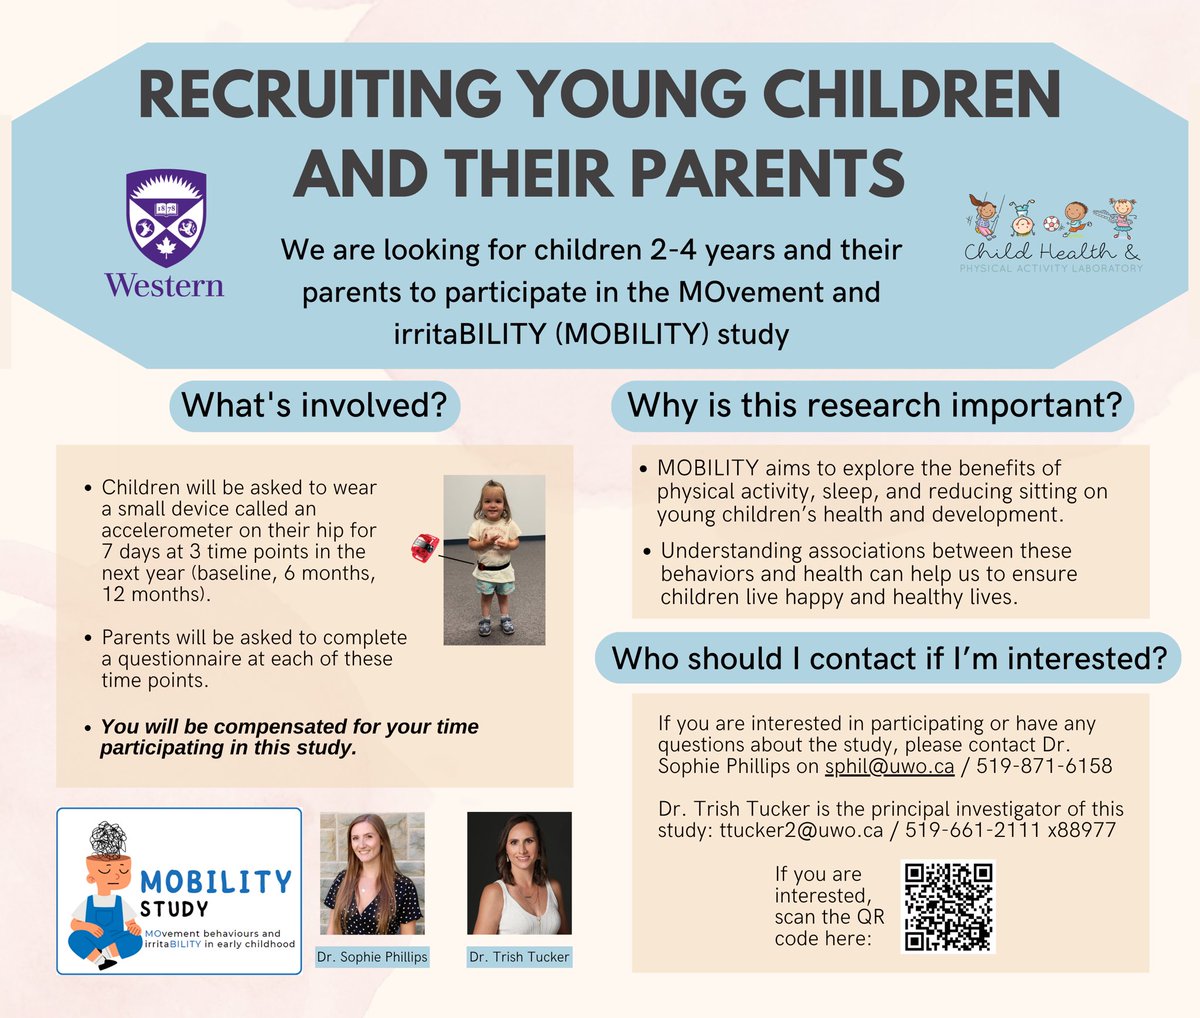 ‼️ Reminder‼ The MOBILITY Study is looking for young children aged 2-4 and their parents to participate! Help us explore the benefits of physical activity 🏃, sleep 🛌, and reduced sitting 🪑 on children’s health and development. Link: uwo.eu.qualtrics.com/jfe/form/SV_9t…